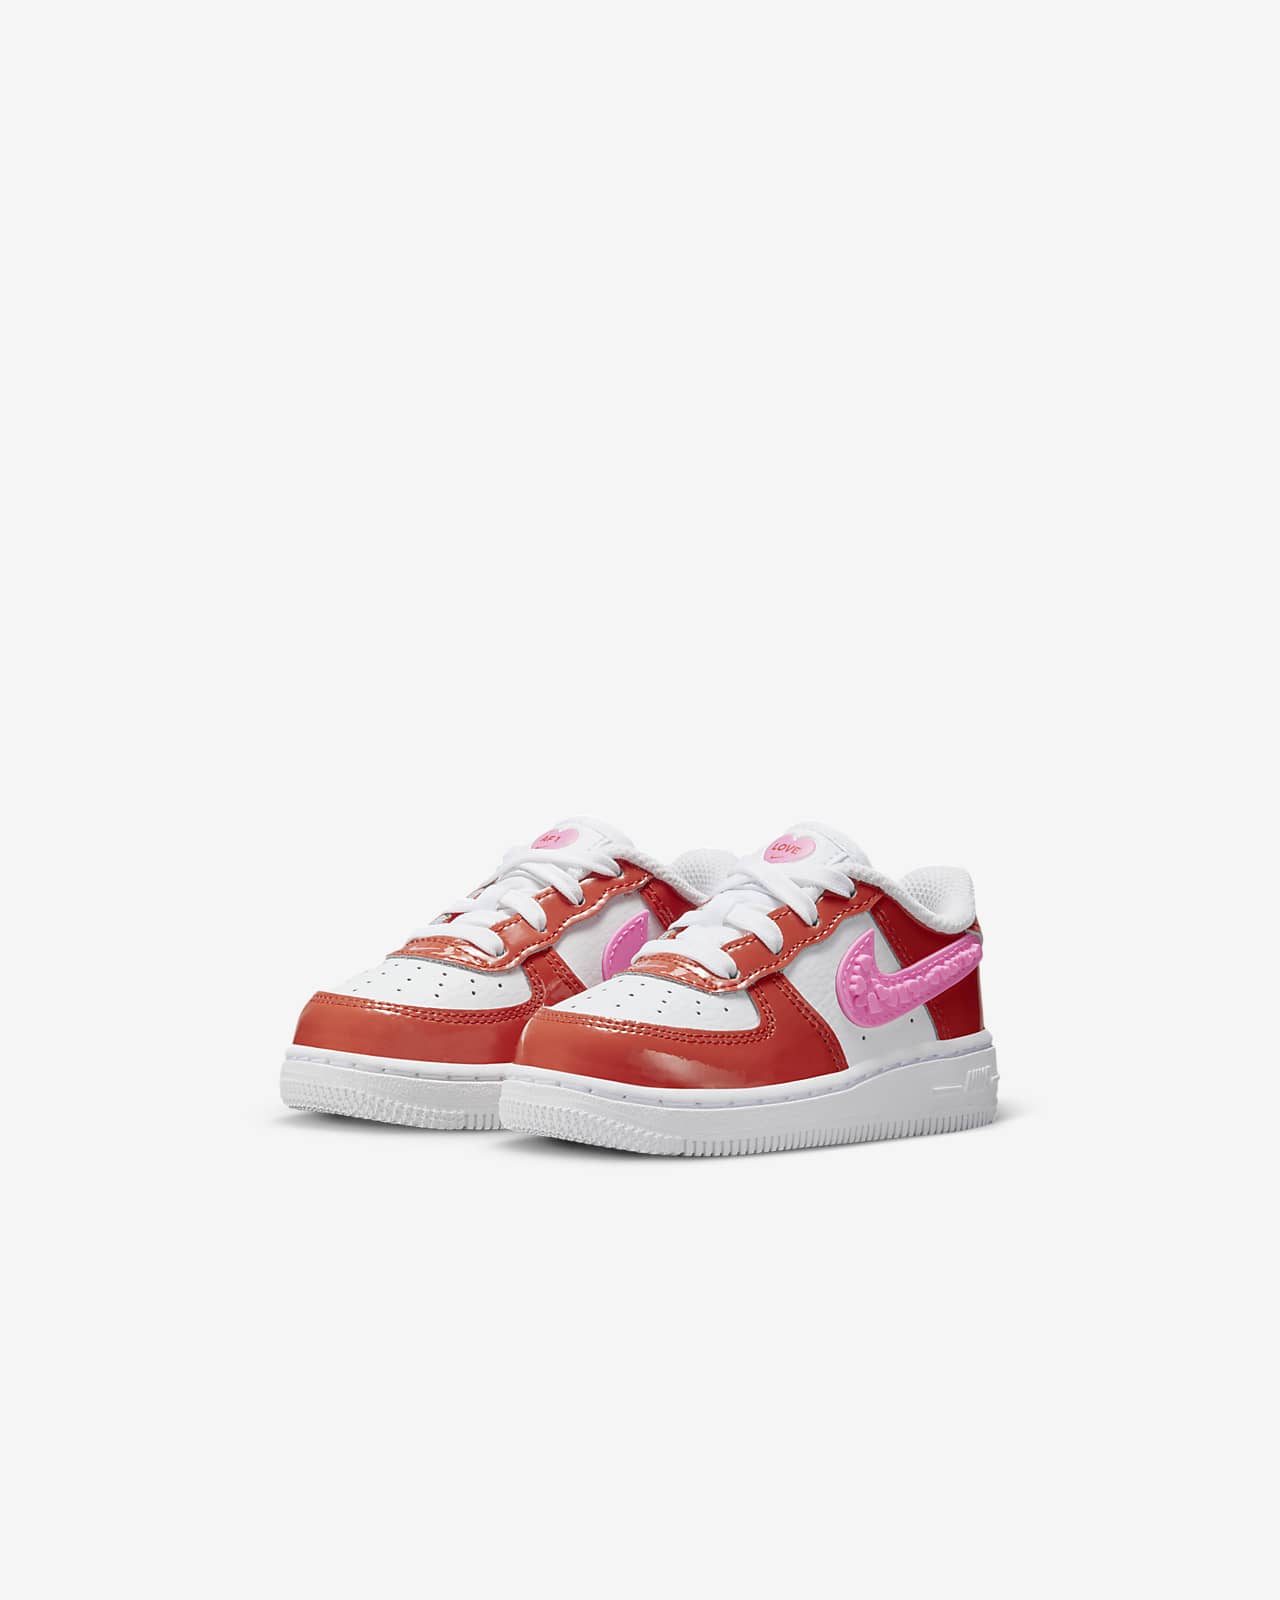 Nike Force 1 LV8 3 Baby/Toddler Shoes